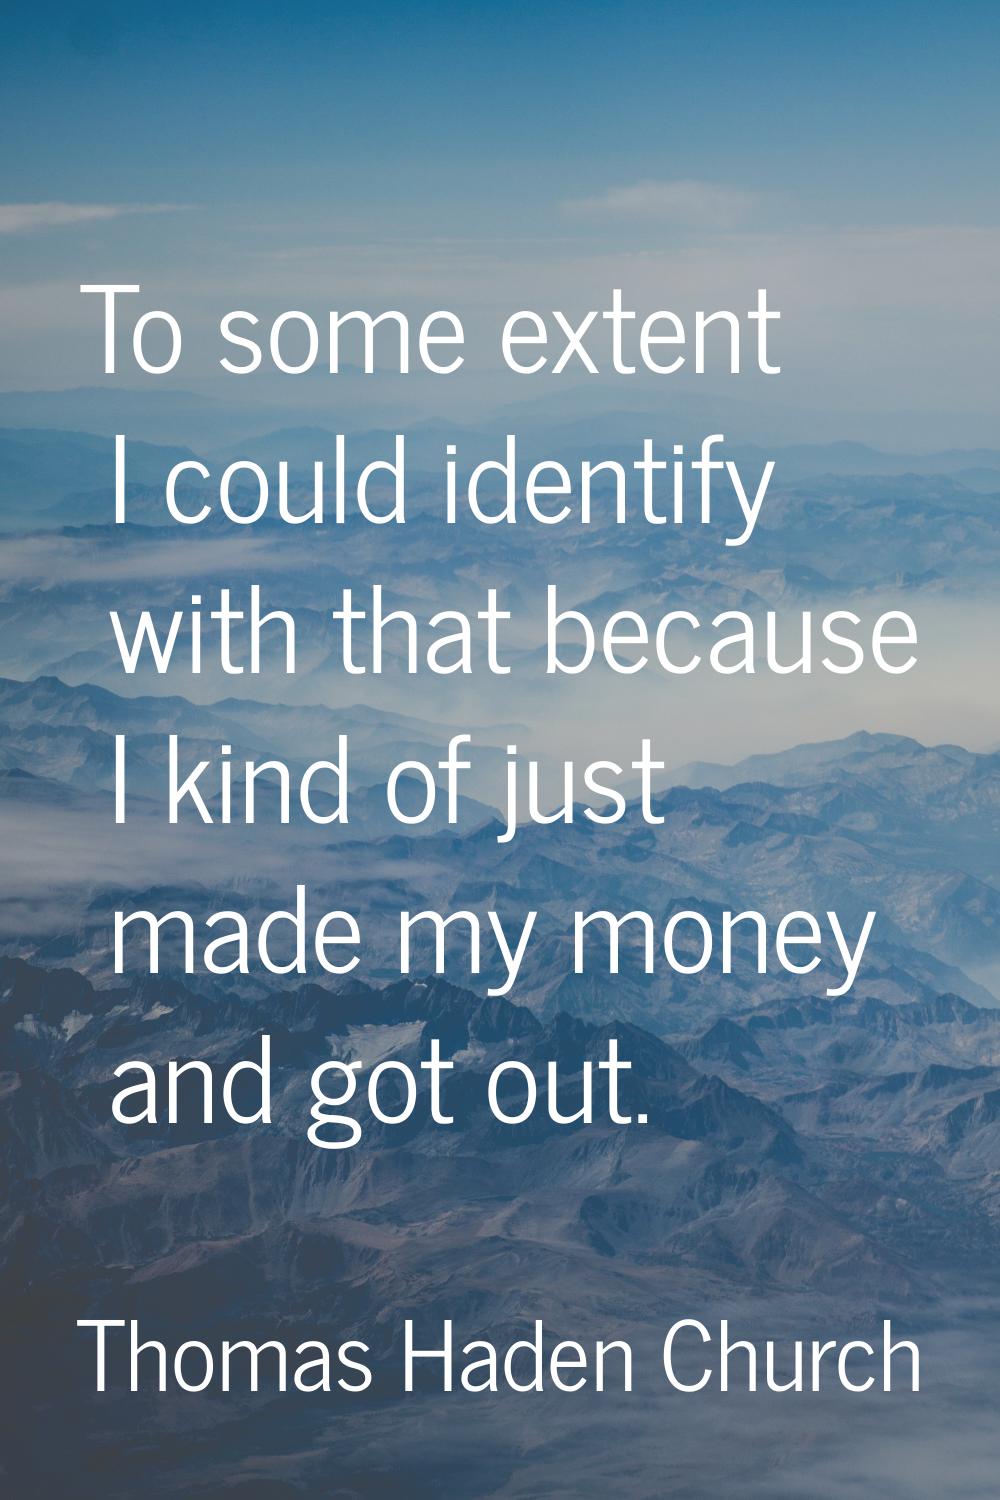 To some extent I could identify with that because I kind of just made my money and got out.